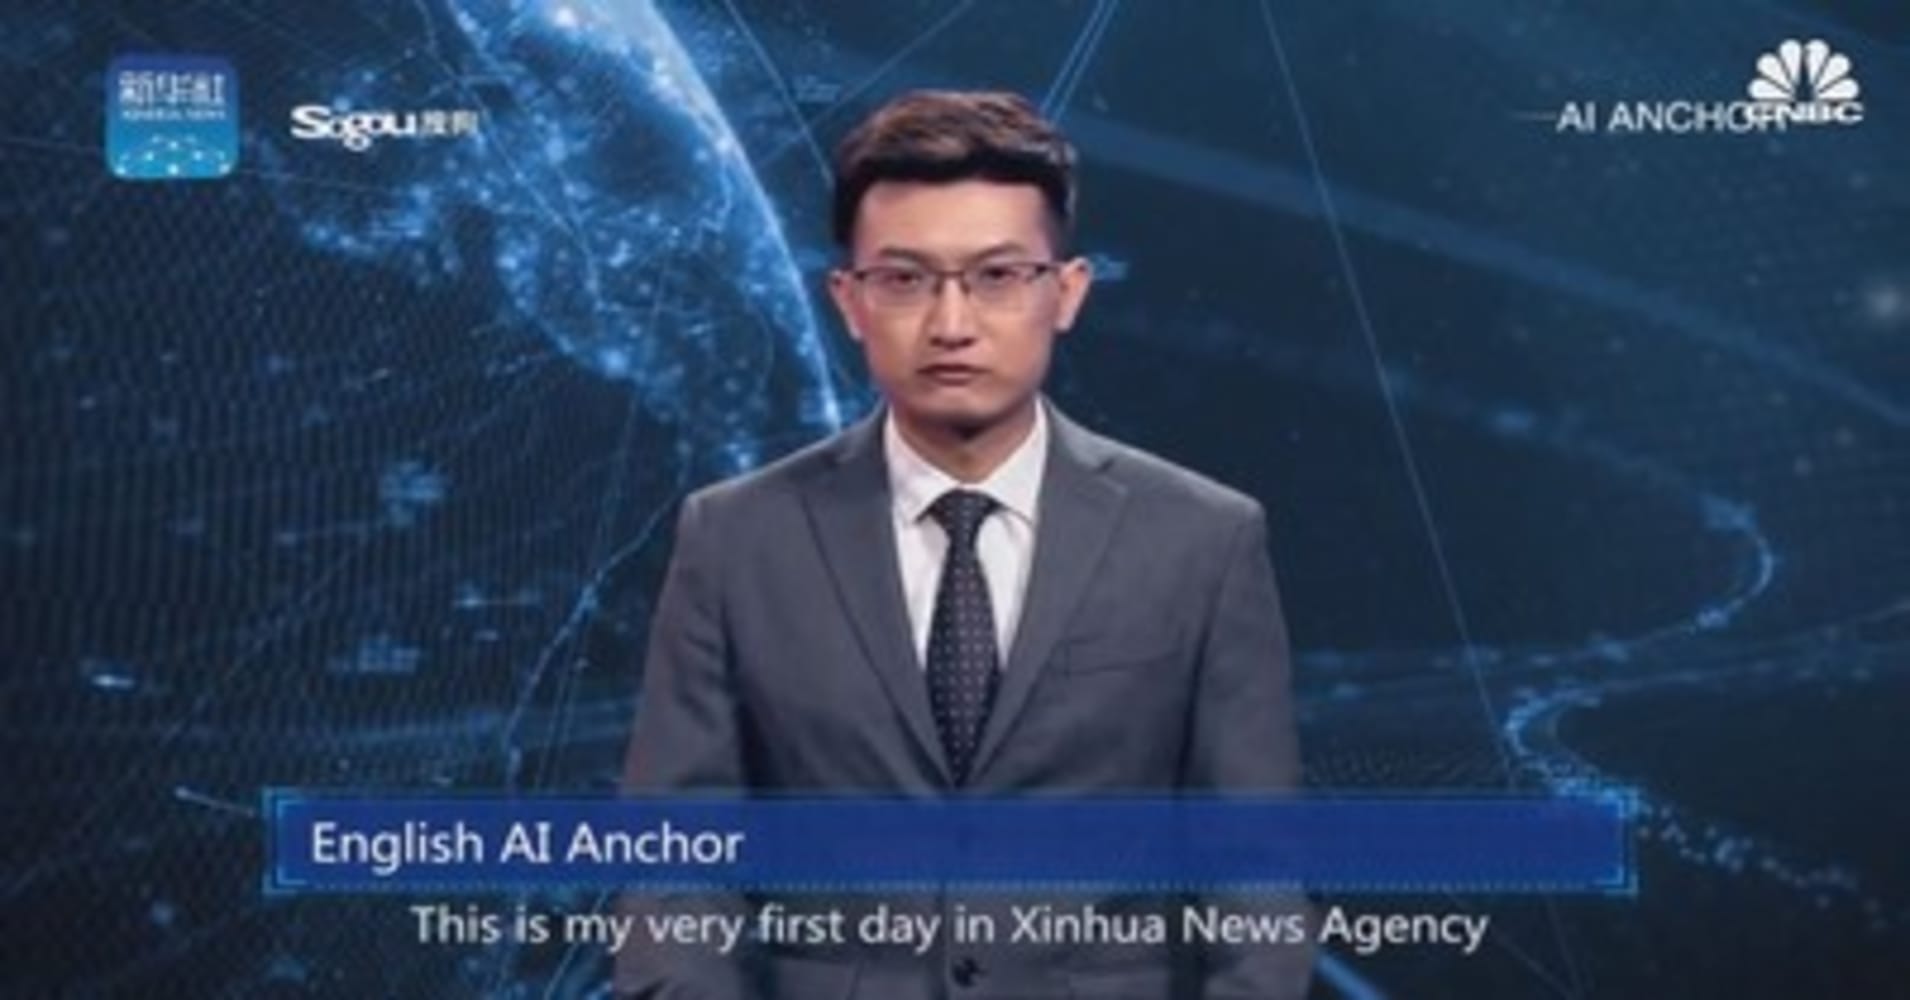 World's first AI news anchor debuts in China